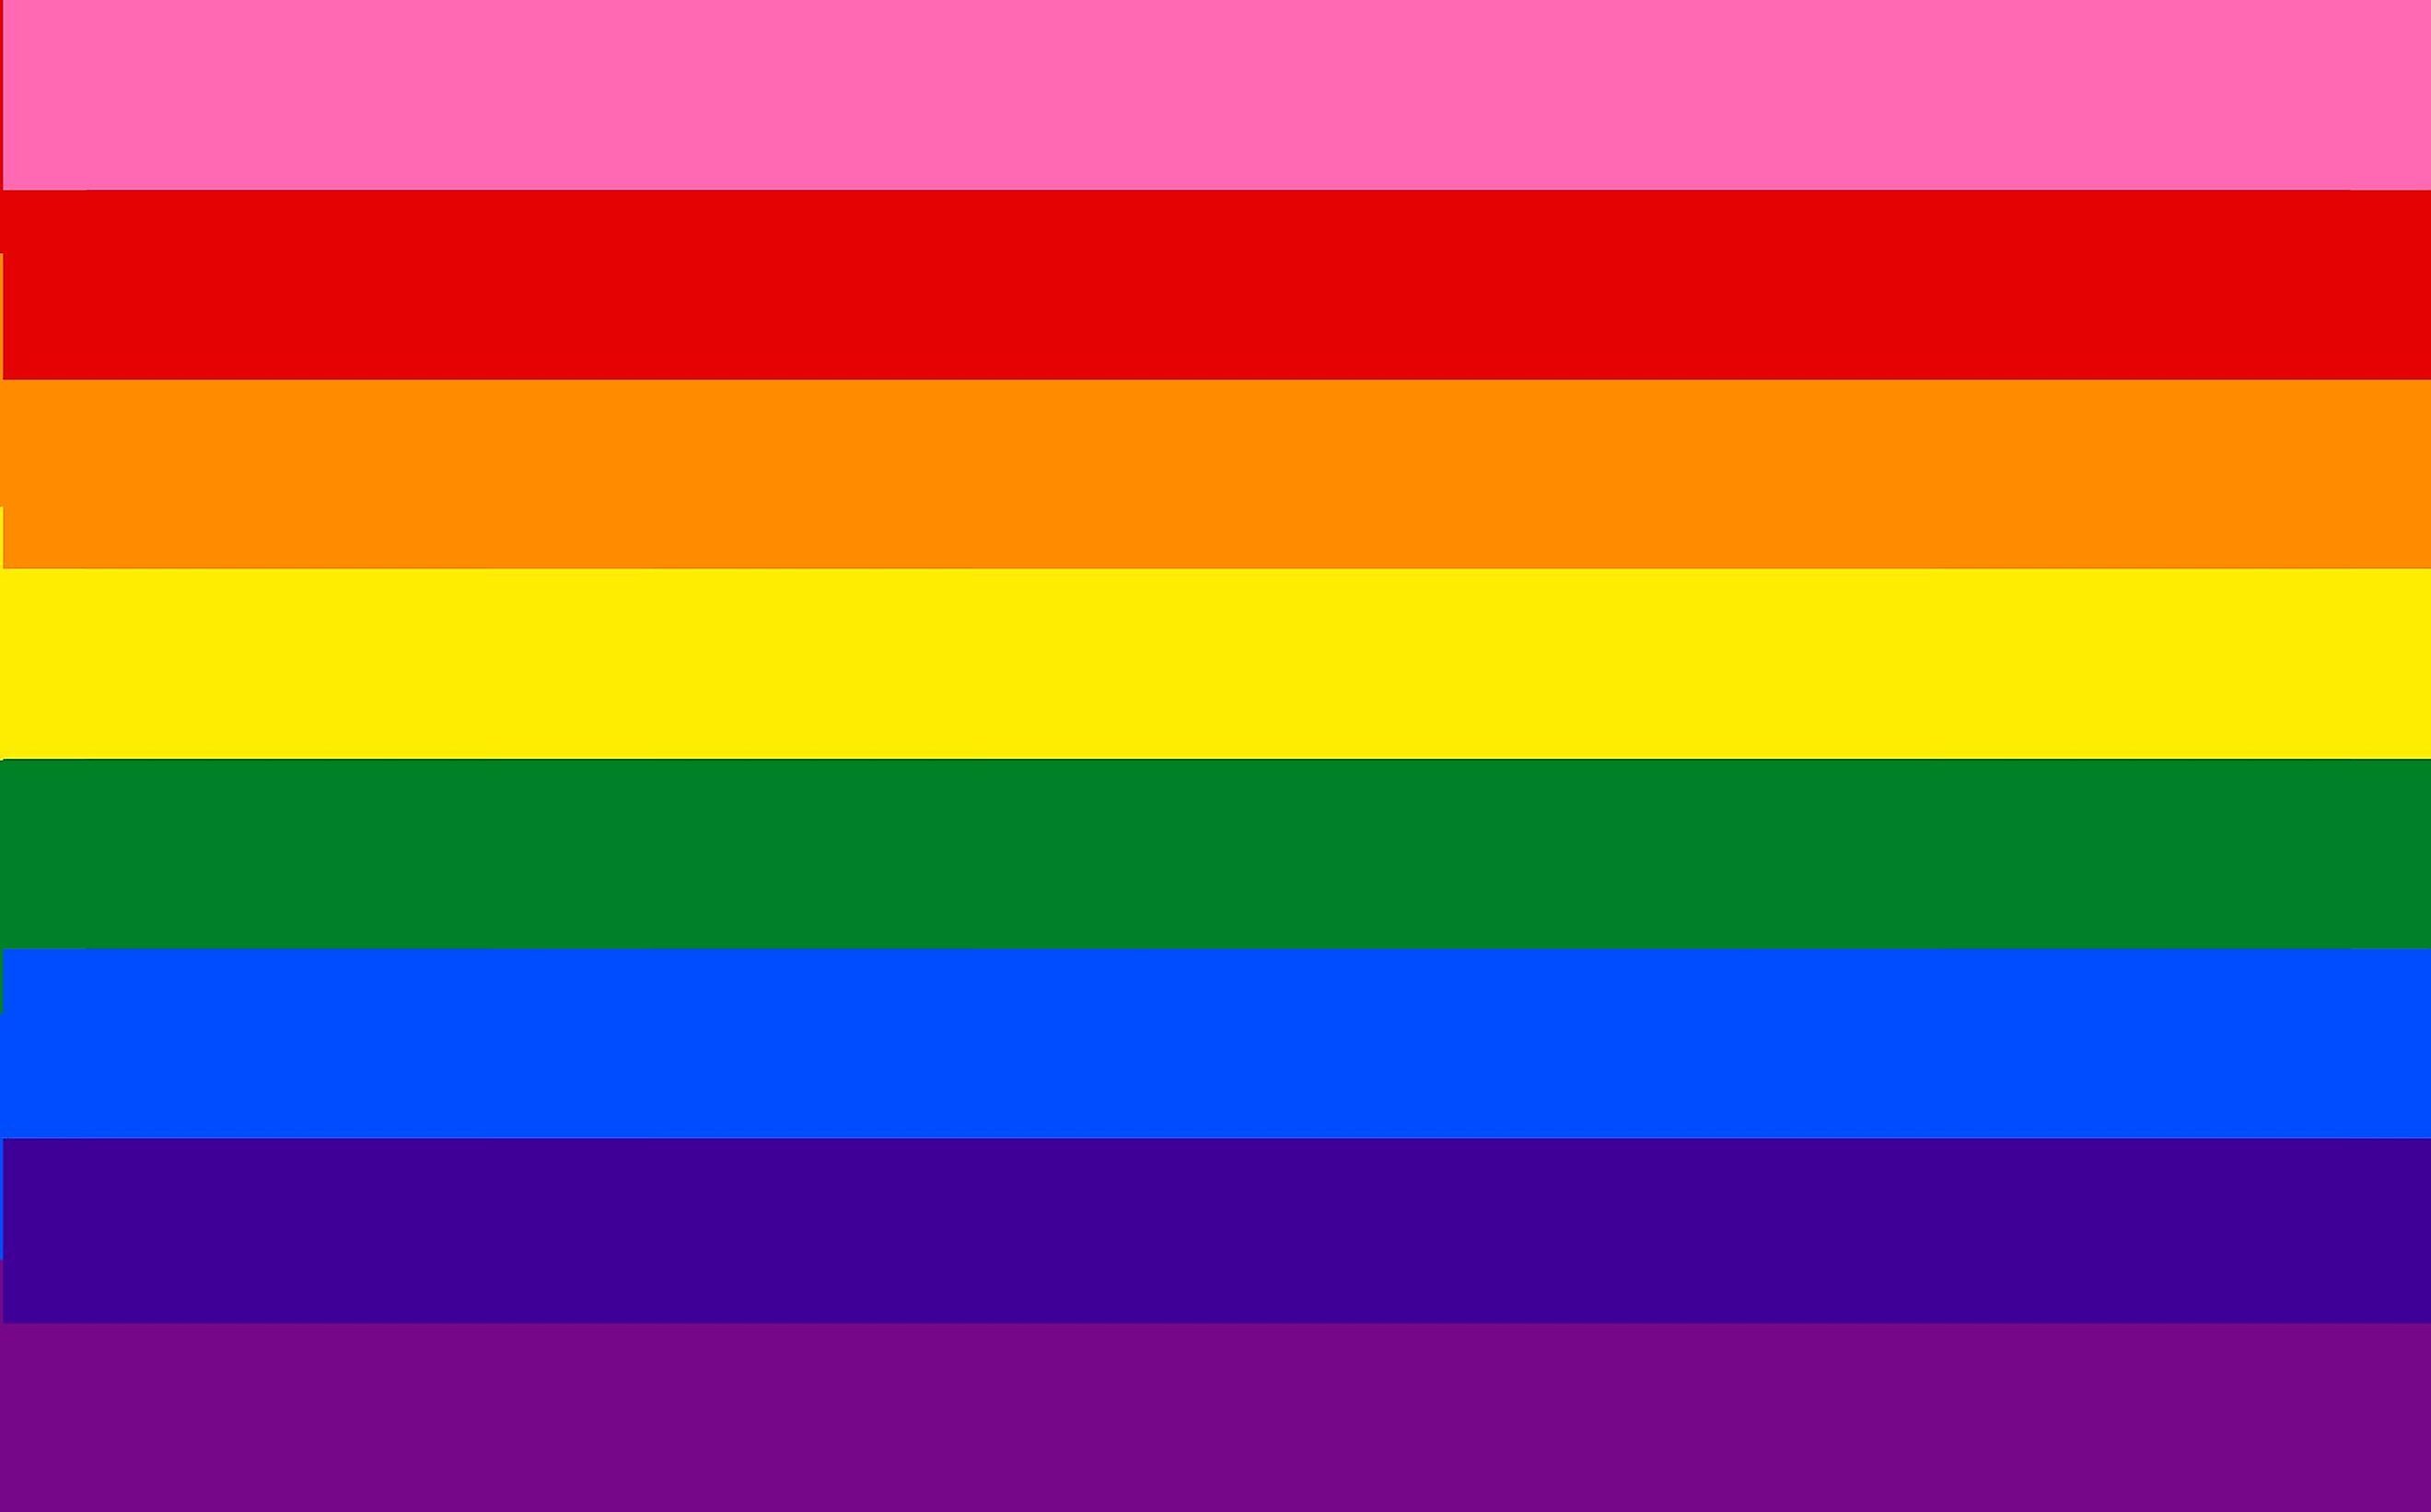 the new gay pride flag is retarded